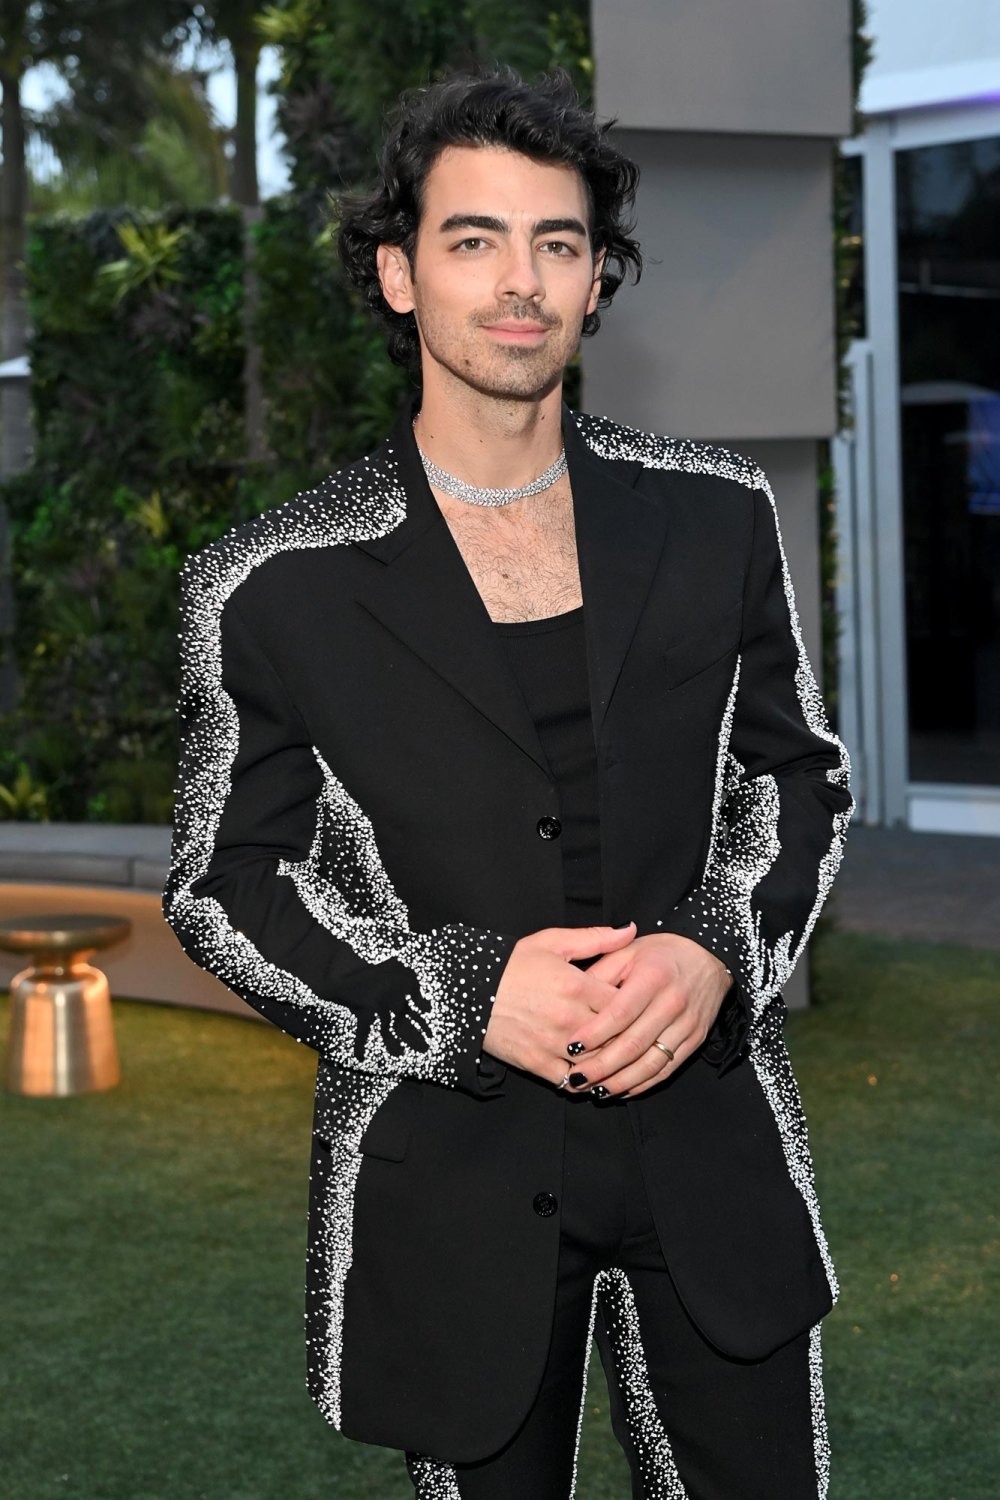 Joe Jonas Likely Has the Upper Hand in Messy Lawsuit With Sophie Turner Over Kids Legal Expert Says 274